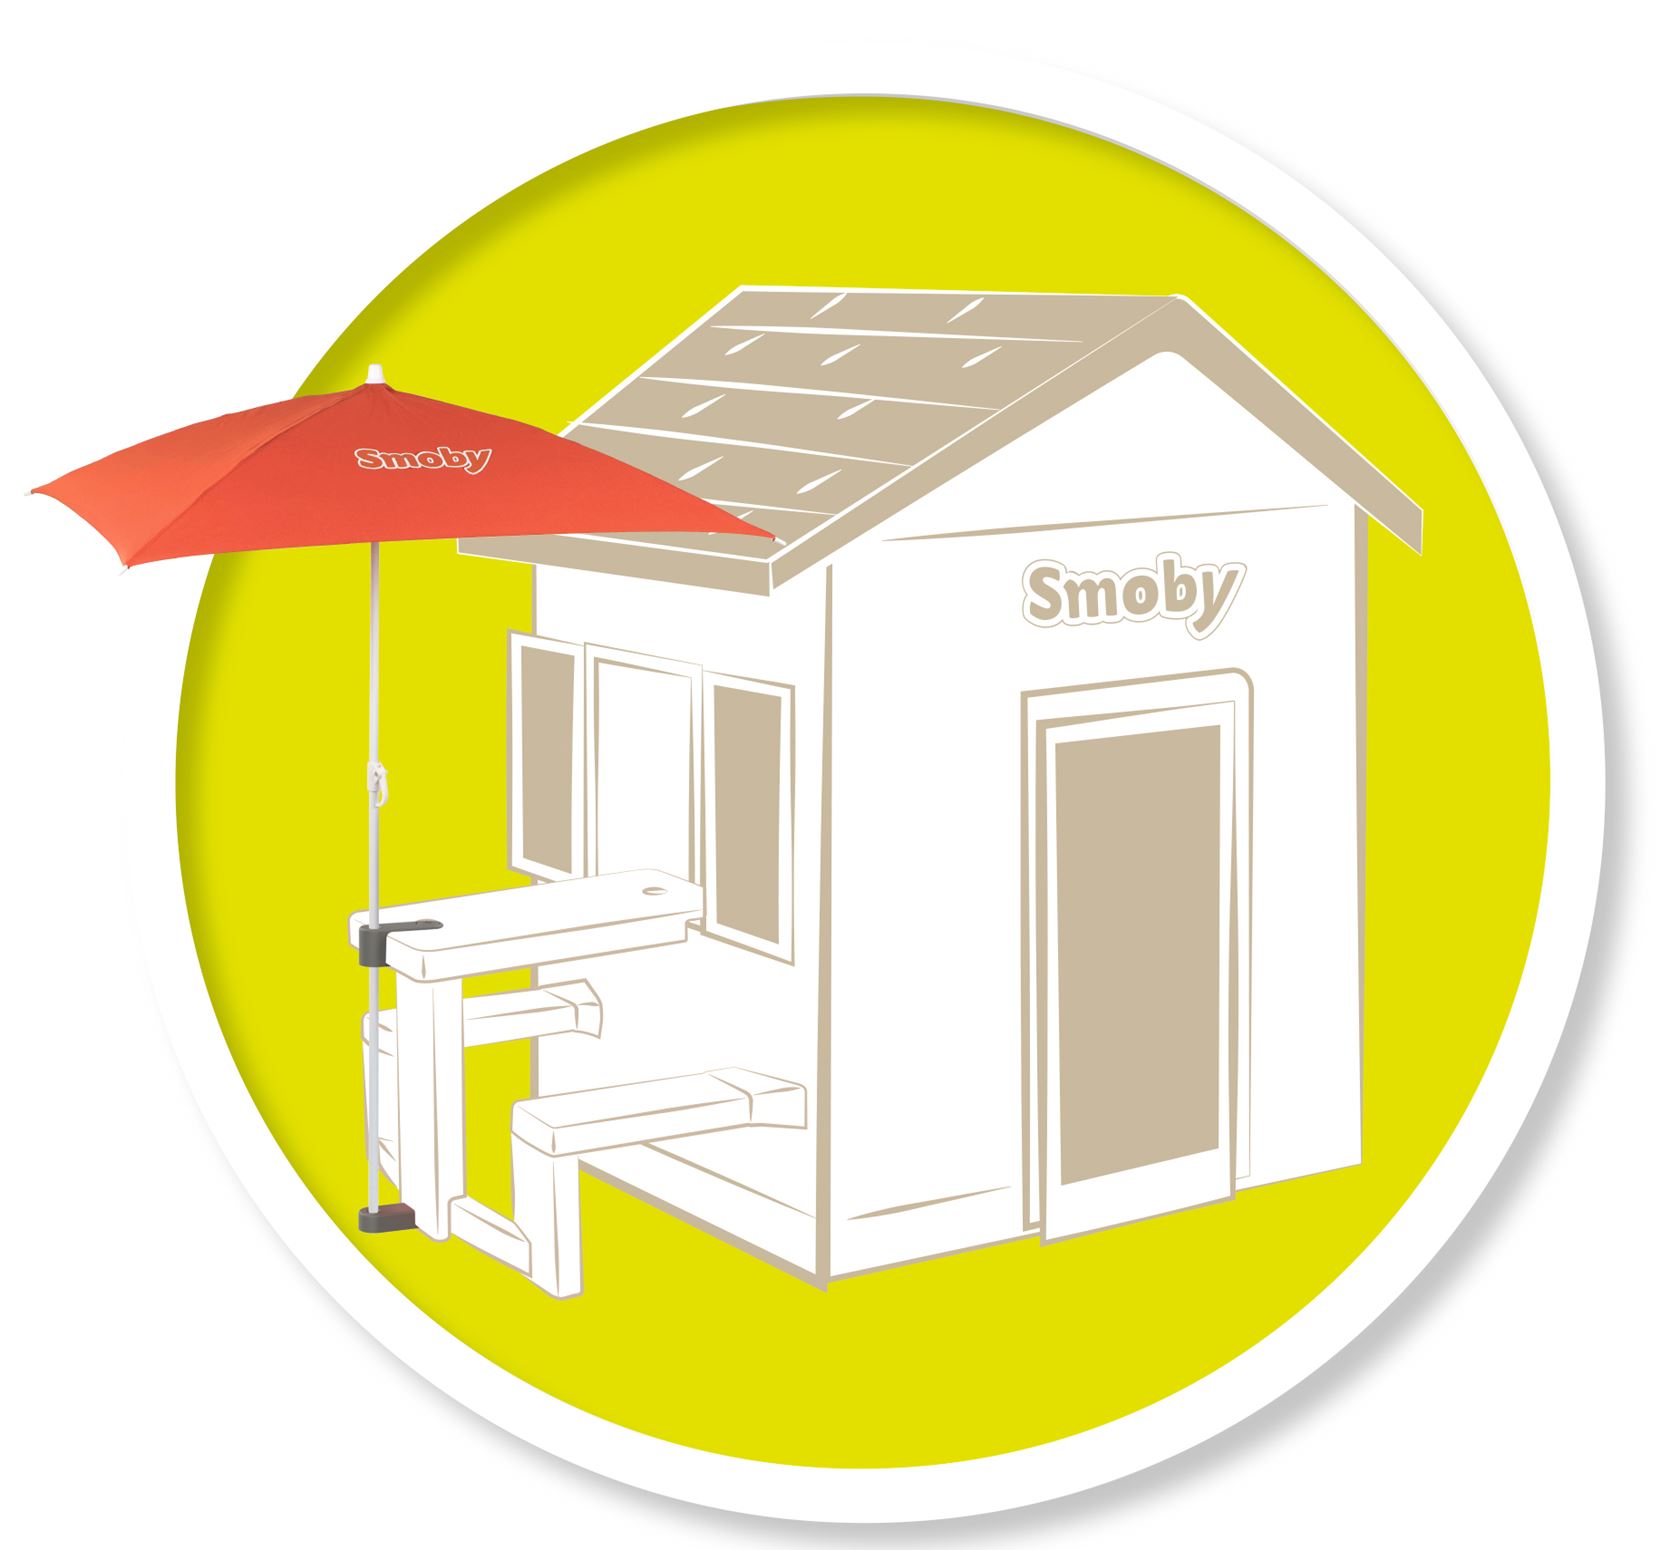 Smoby accessory - parasol for Smoby playhouses